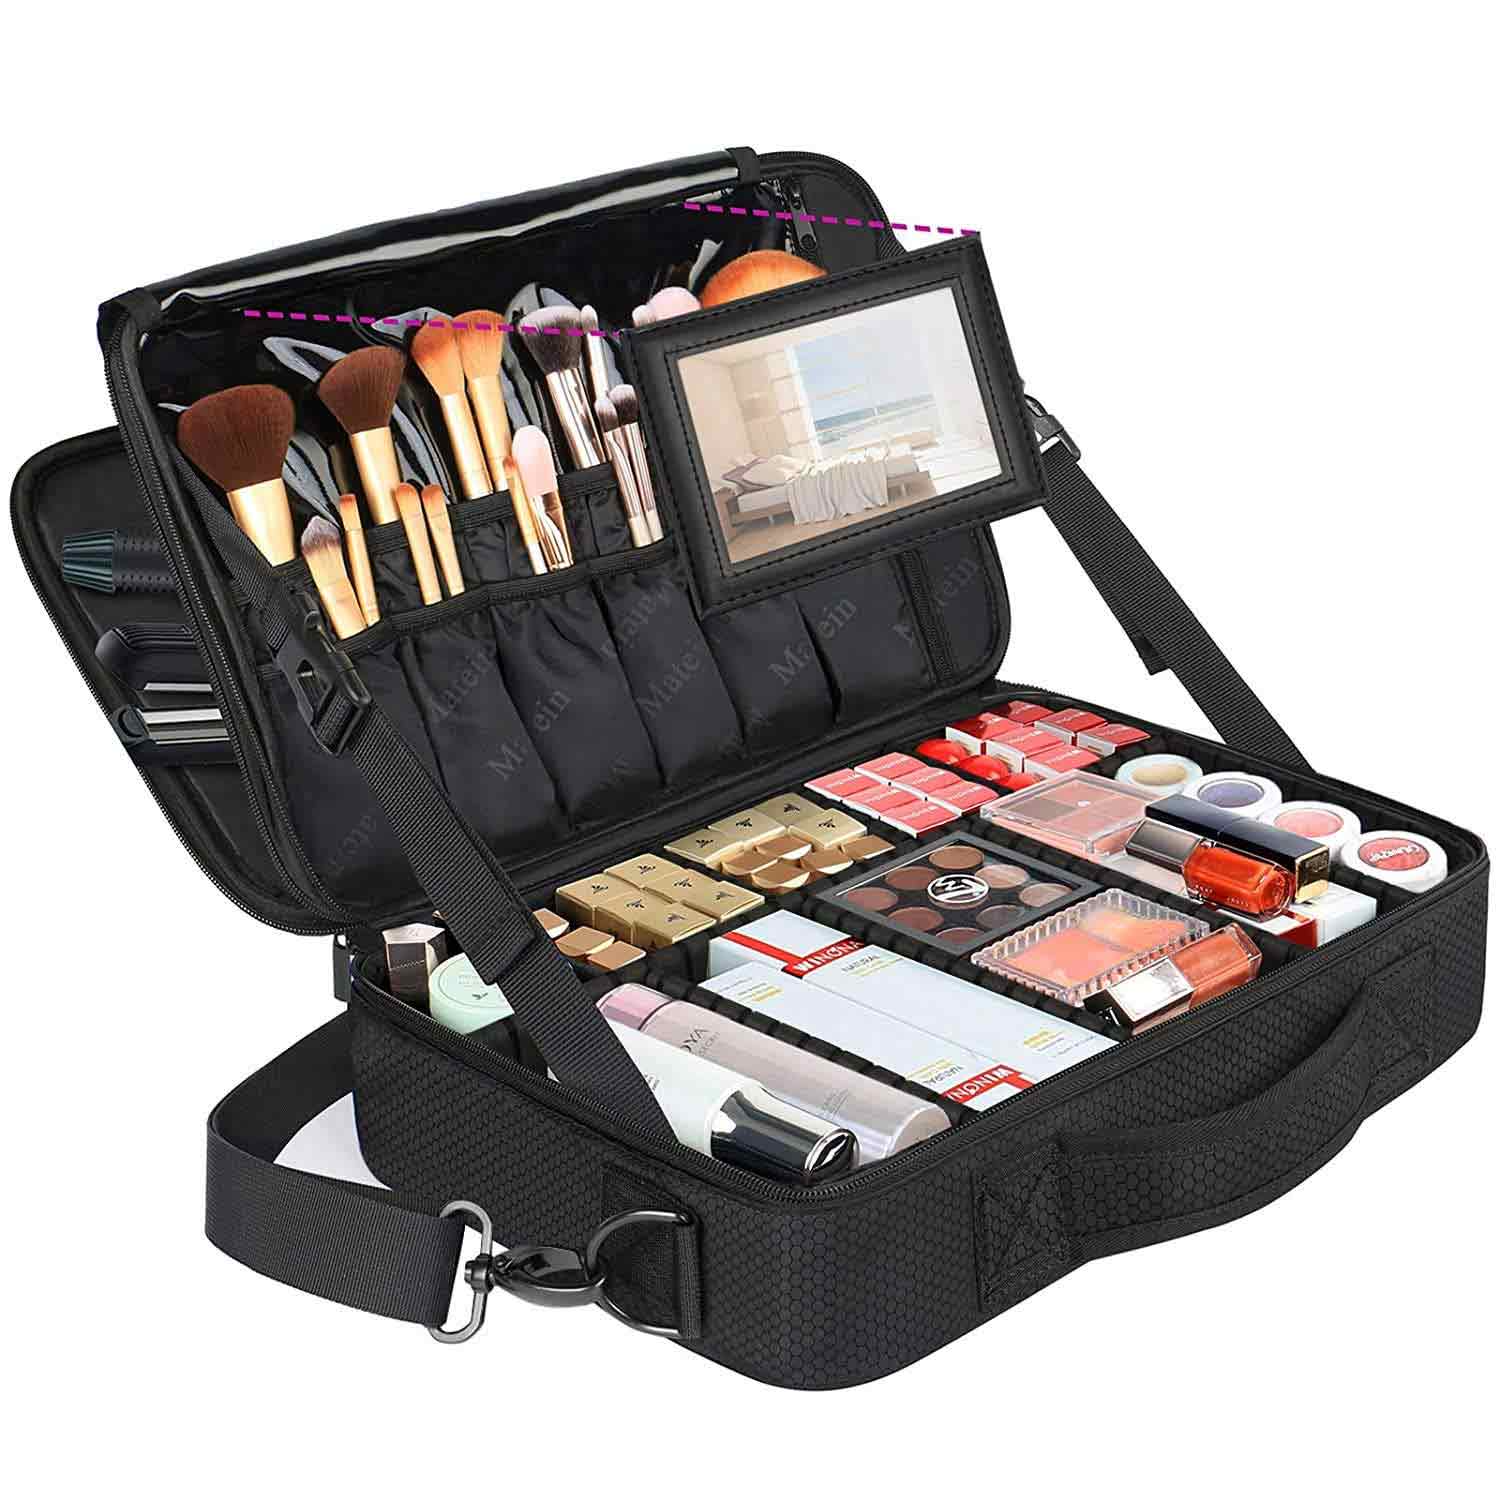 Makeup bag and Jewelry Bag for Women, Travel Make Up Bag Organizer with  Compartments Portable Waterproof Makeup Case(Black, Large) 